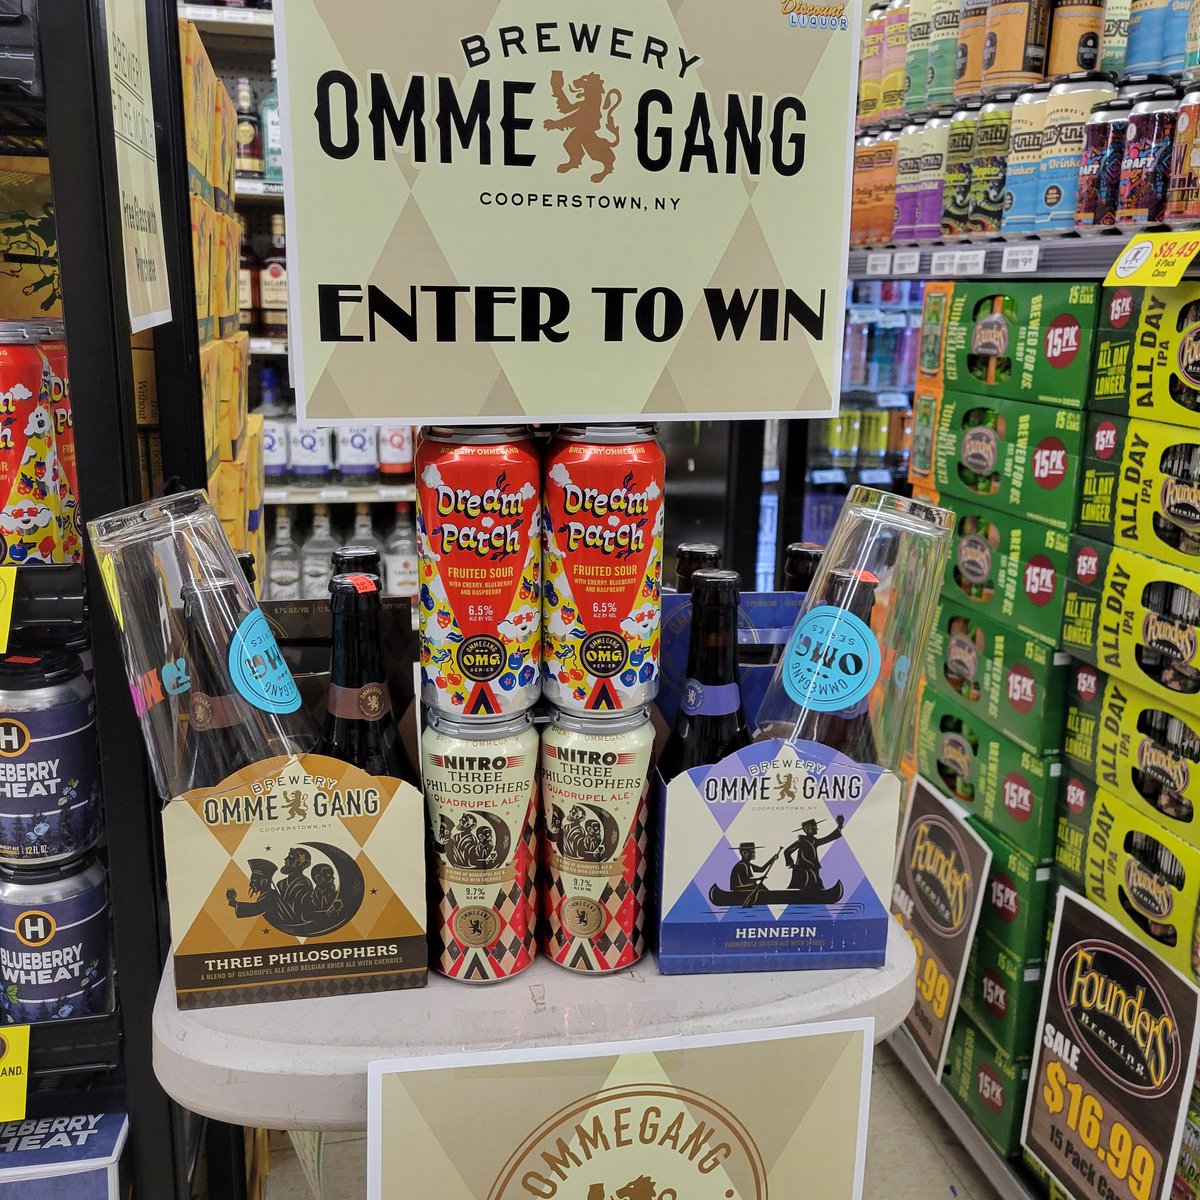 Join @BreweryOmmegang this afternoon for a sample or 2! Pouring from 12-2!